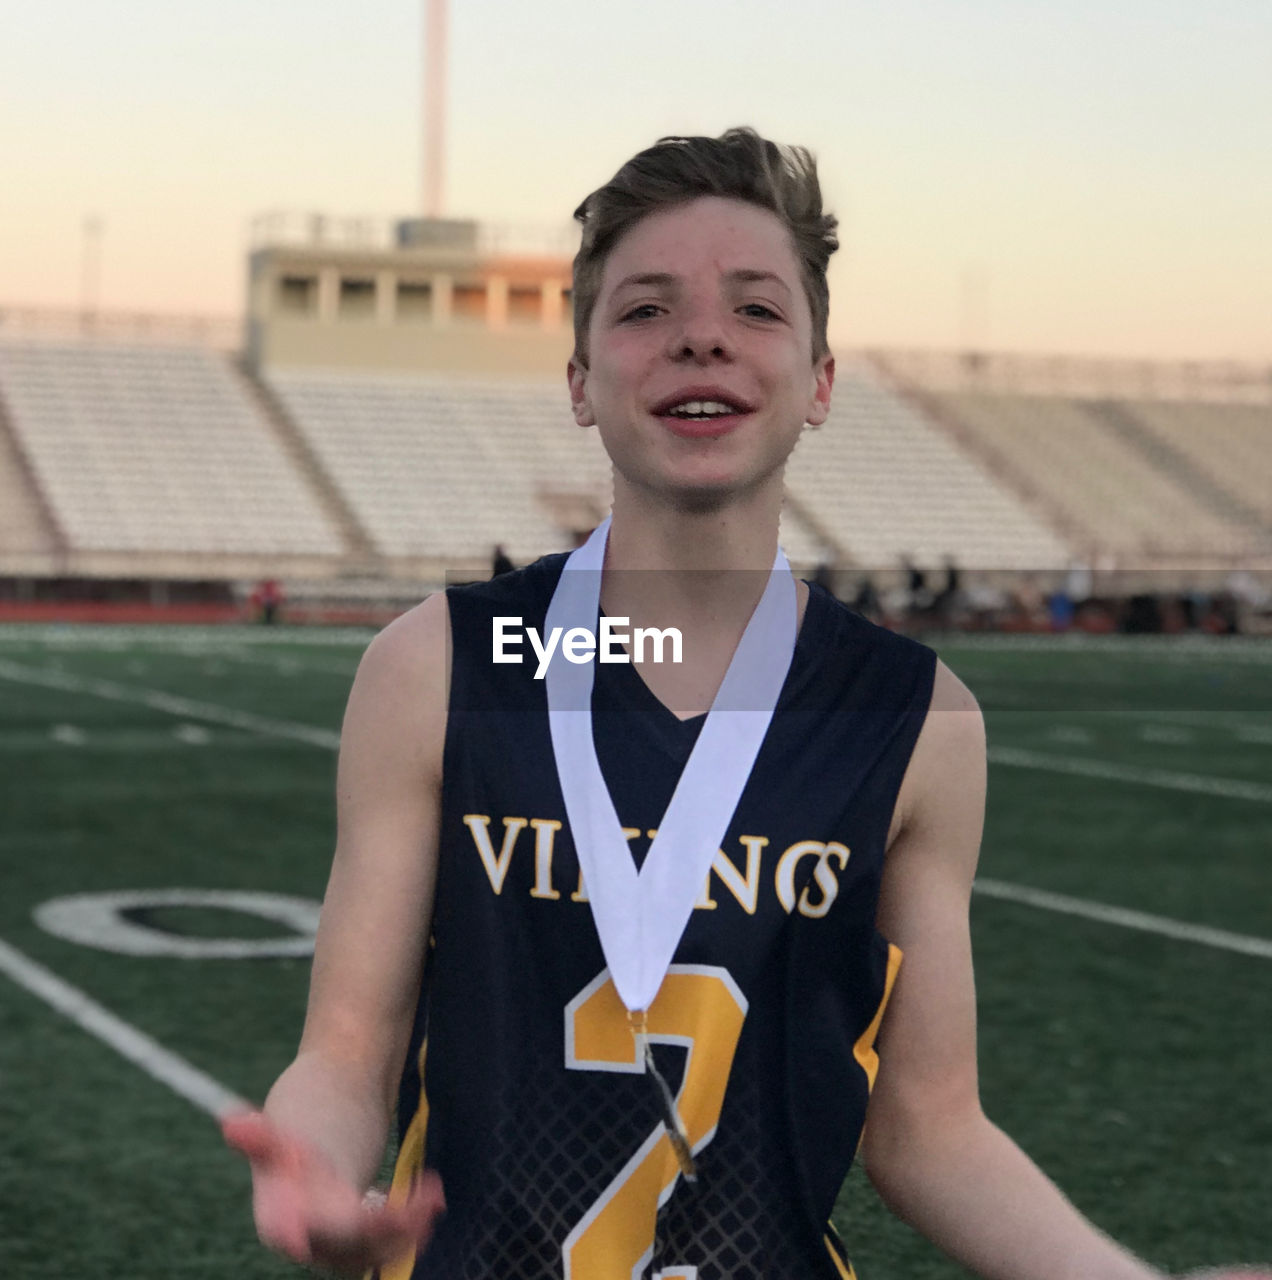 Portrait of young boy with winning medal on football field 